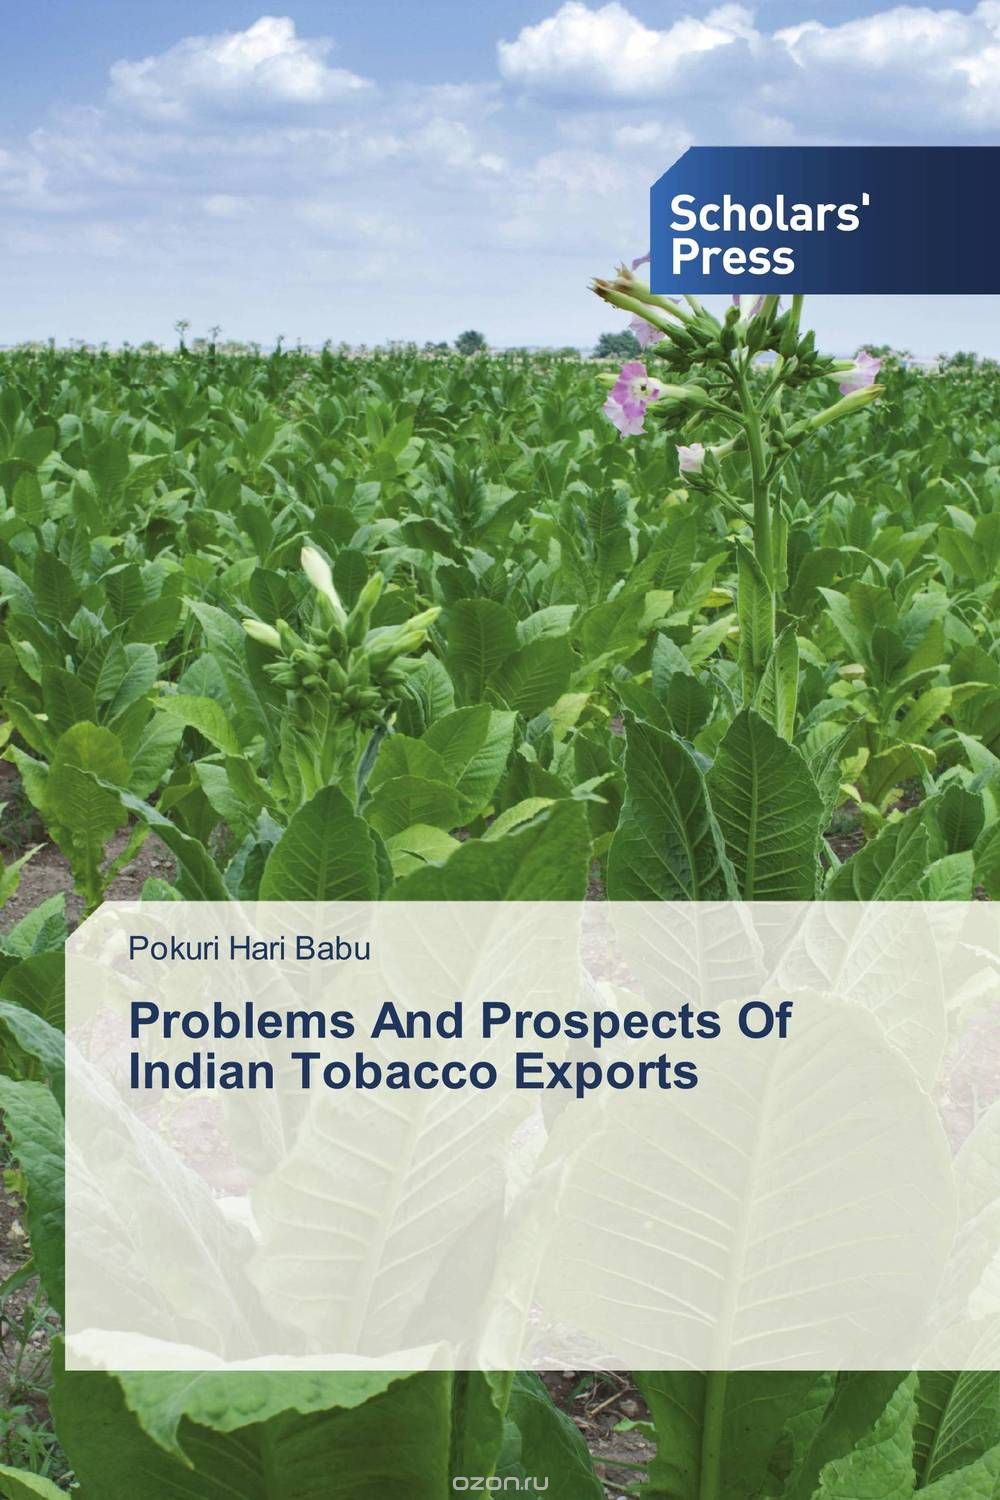 Скачать книгу "Problems And Prospects Of Indian Tobacco Exports"